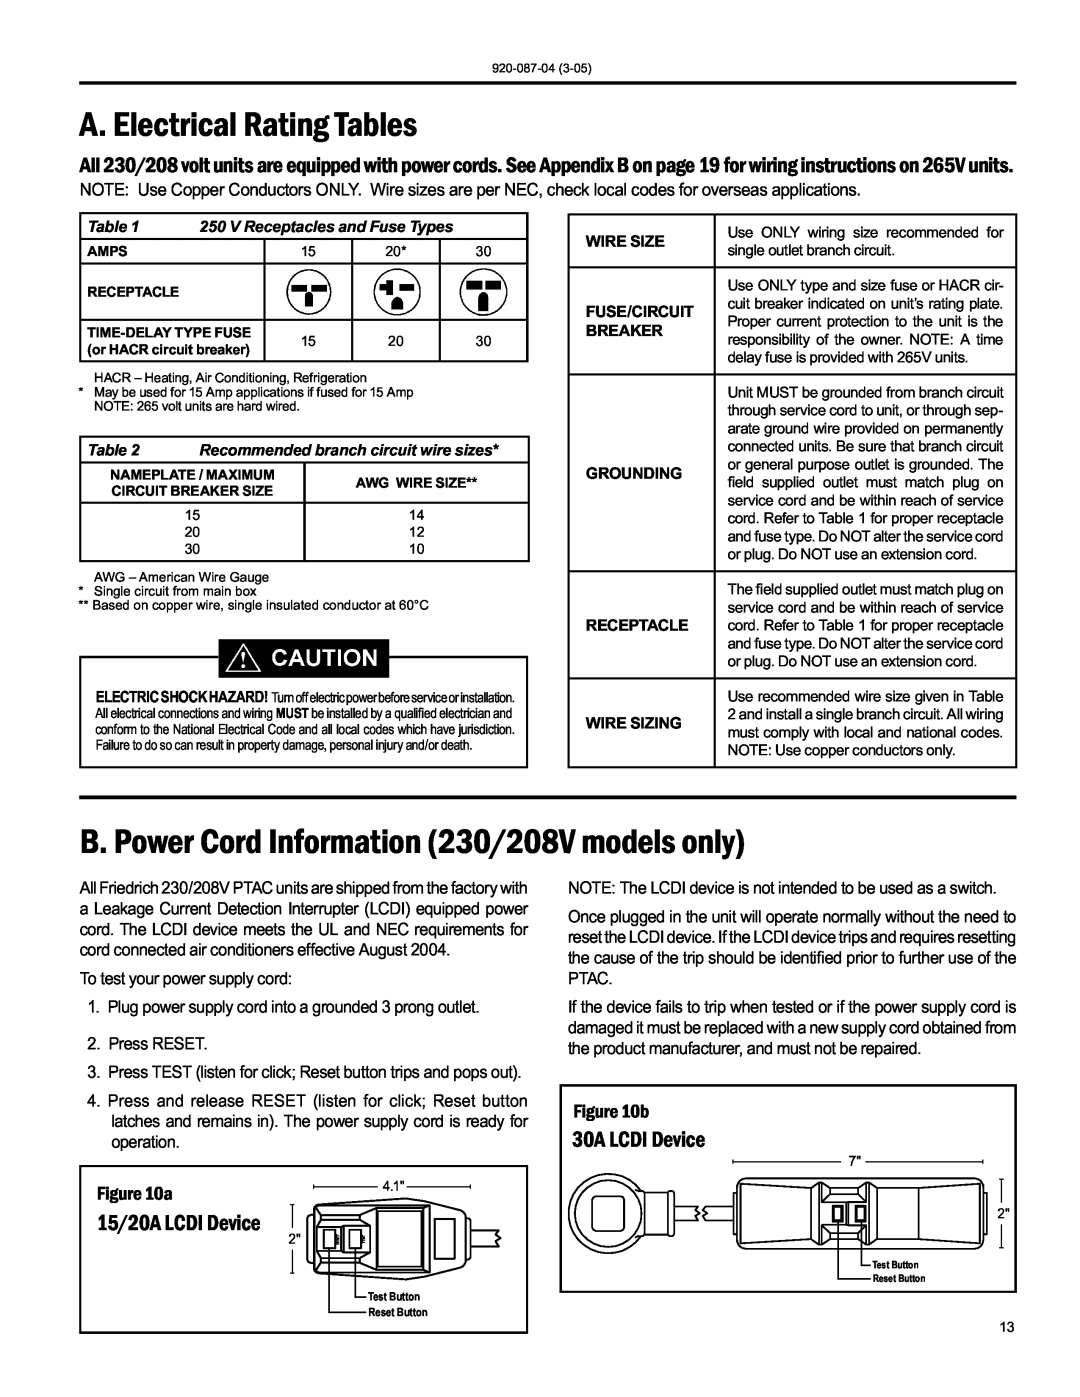 Friedrich 920-087-04 (3-05) A. Electrical Rating Tables, B. Power Cord Information 230/208V models only, 30A LCDI Device 